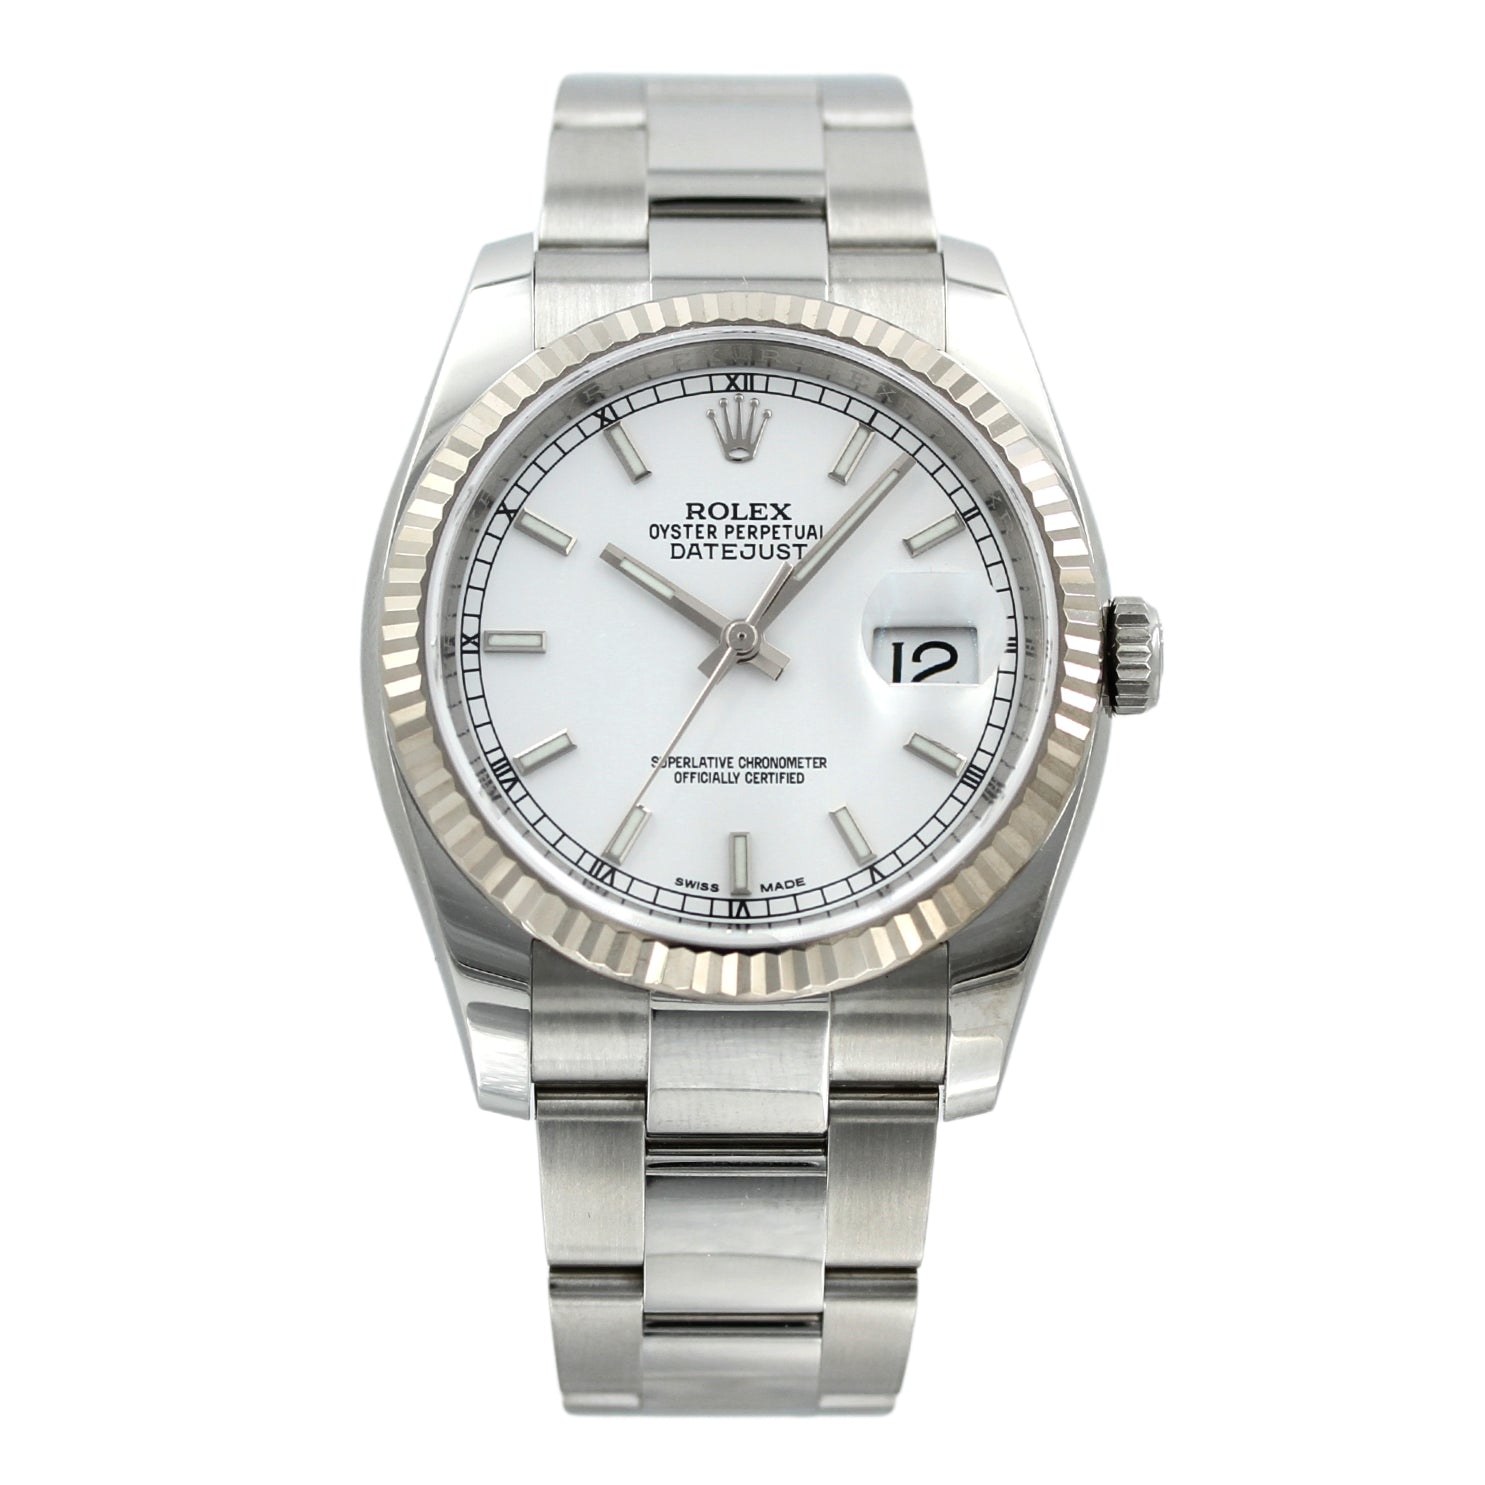 Rolex Datejust 36, White Dial, Oyster, Ref. 116234, 2019, B+P - LUXUHRIA